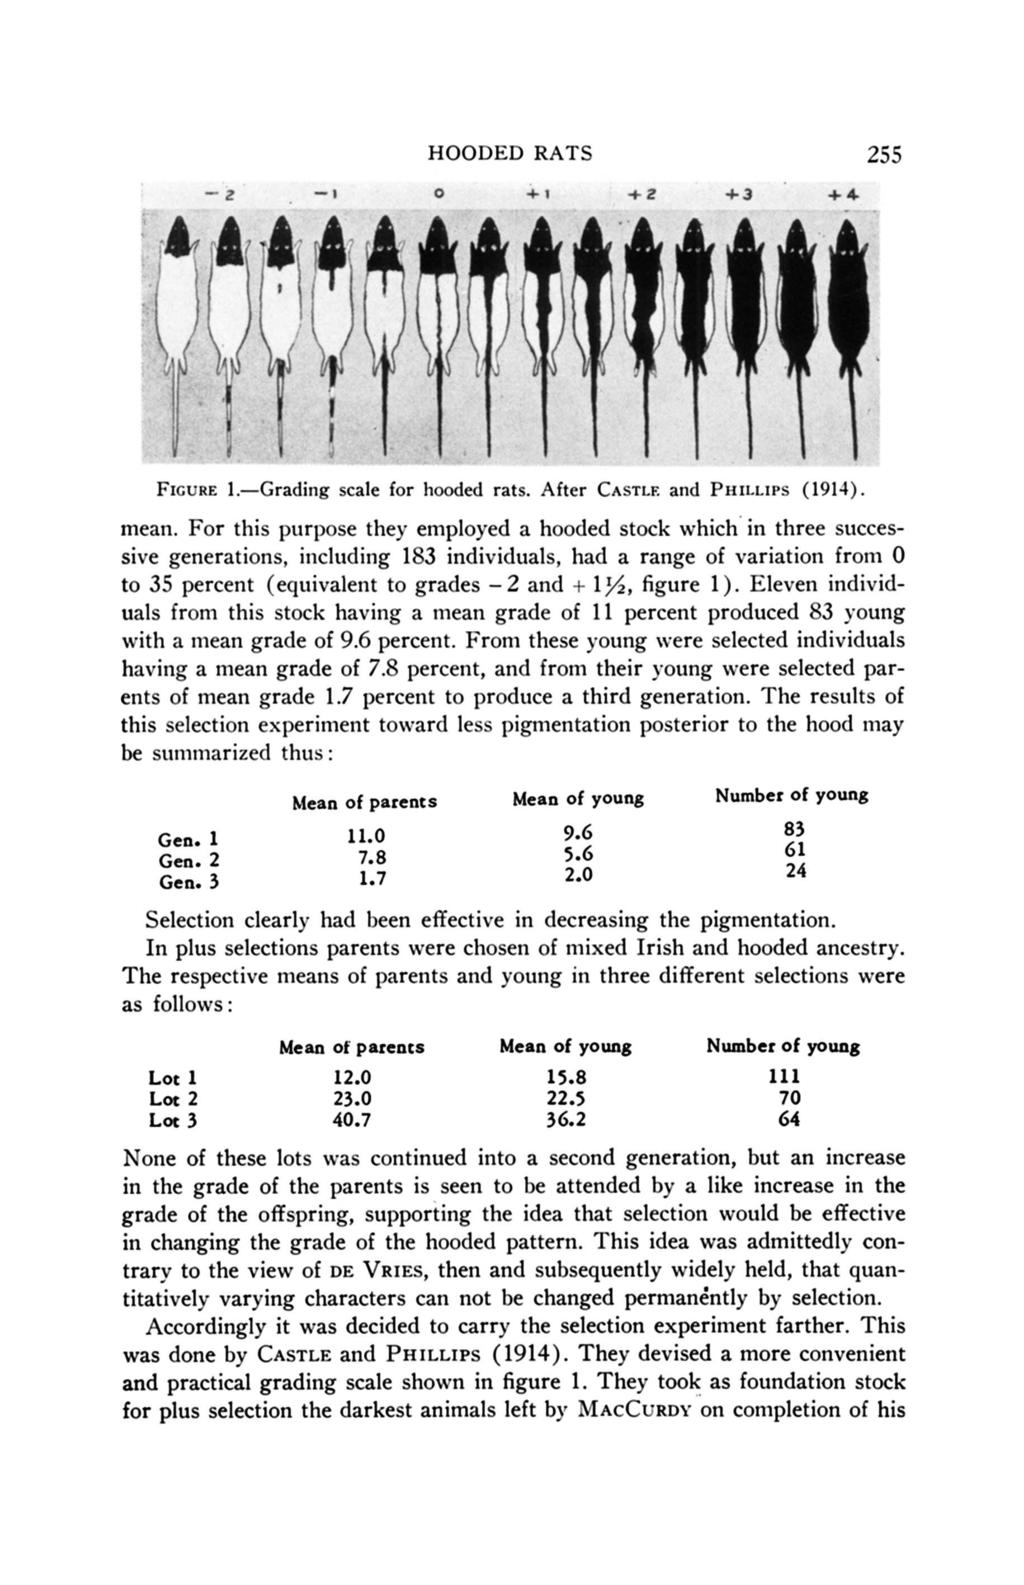 HOODED RATS 255 FIGURE 1.-Grading scale for hooded rats. After CASTLE and PHILLIPS (1911). mean.